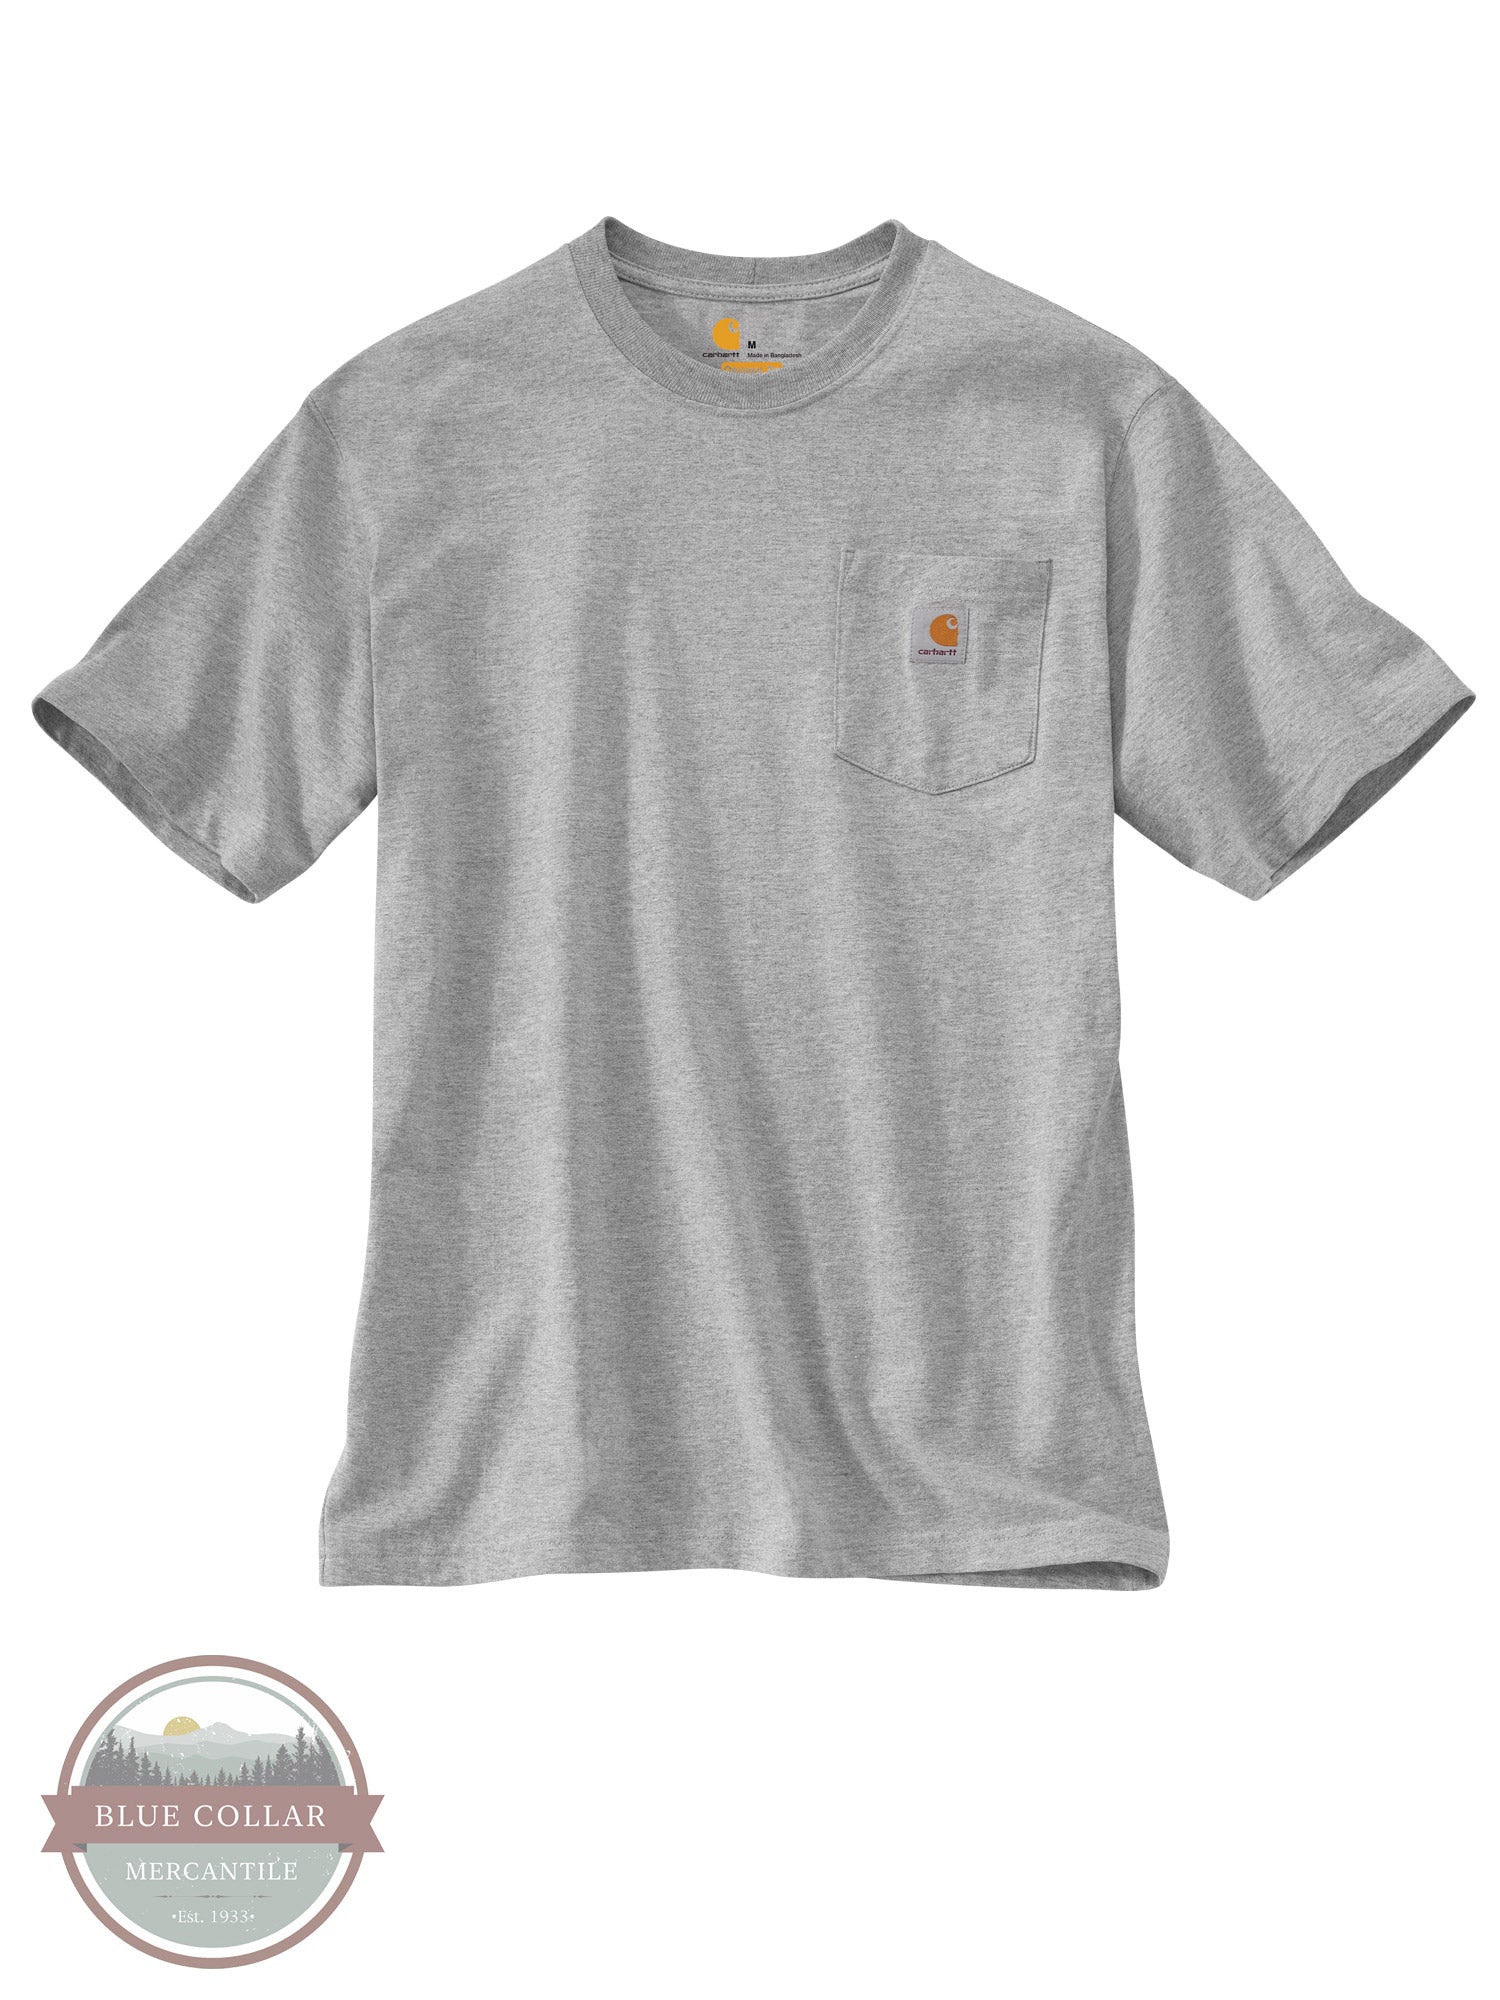 Carhartt K87 Loose Fit Heavyweight Short Sleeve Pocket T-Shirt Basic Colors Heather Gray Front View